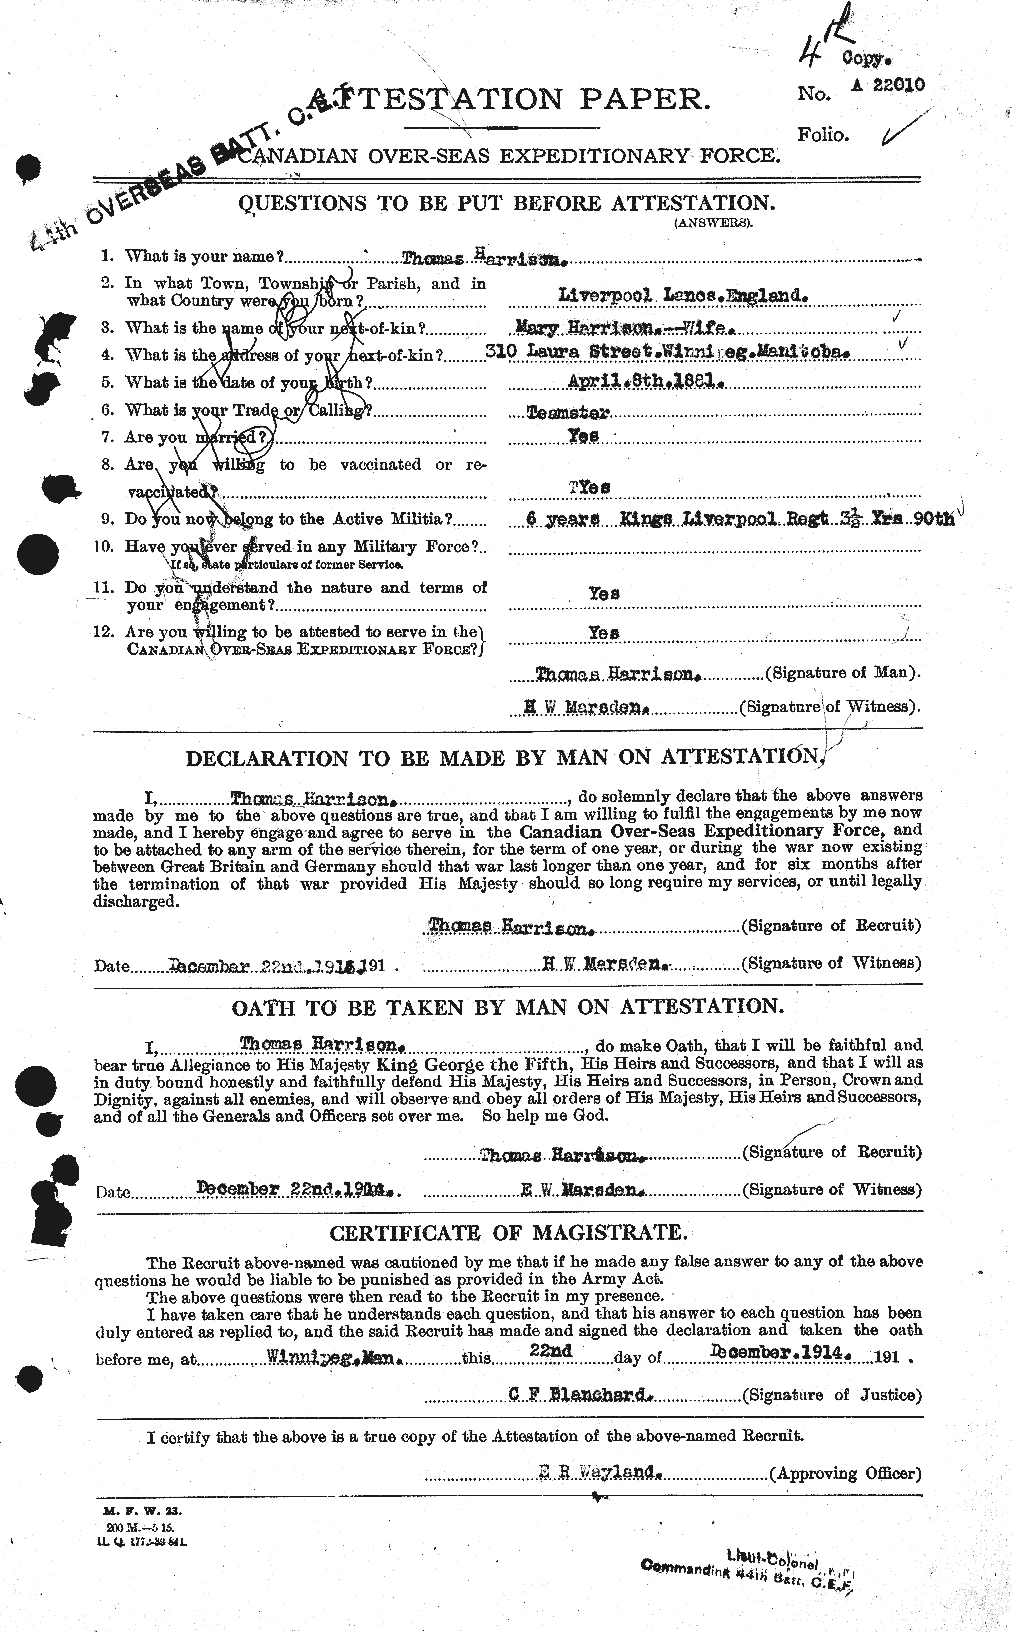 Personnel Records of the First World War - CEF 379885a